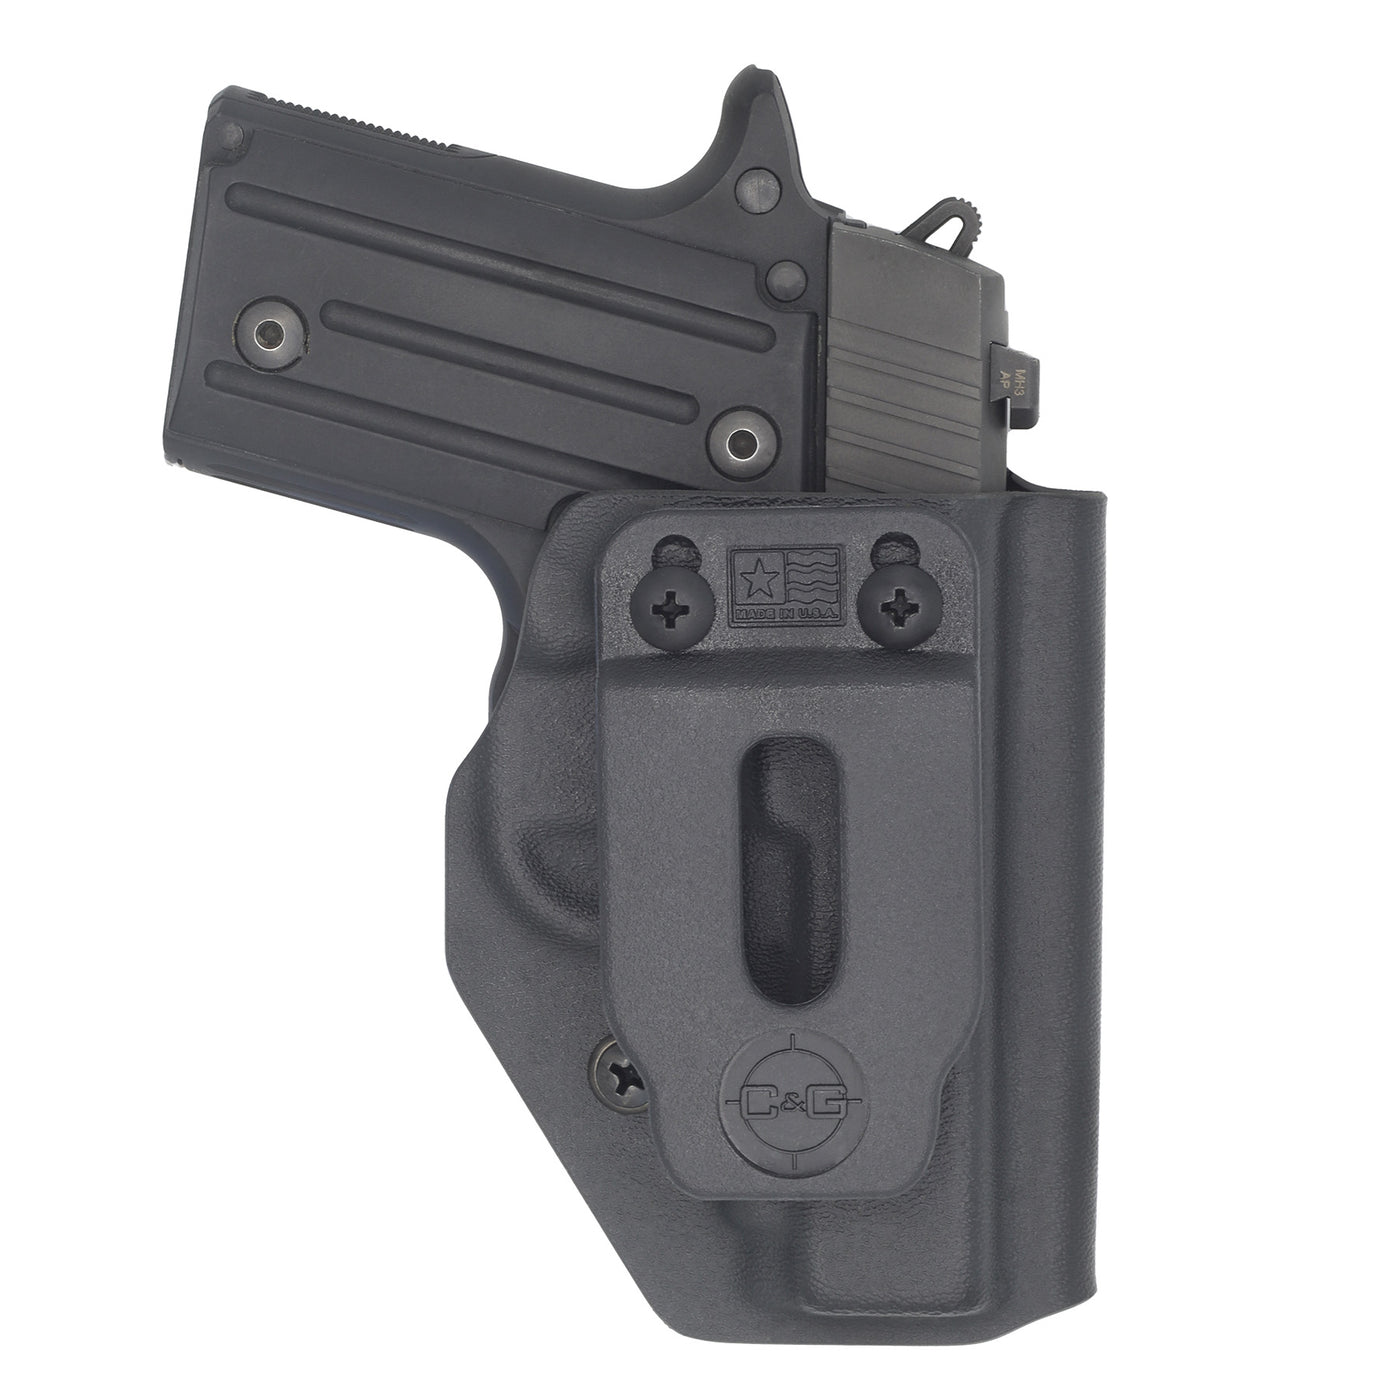 C&G Holsters quick ship Covert IWB kydex holster for Sig P238 in black front view with gun